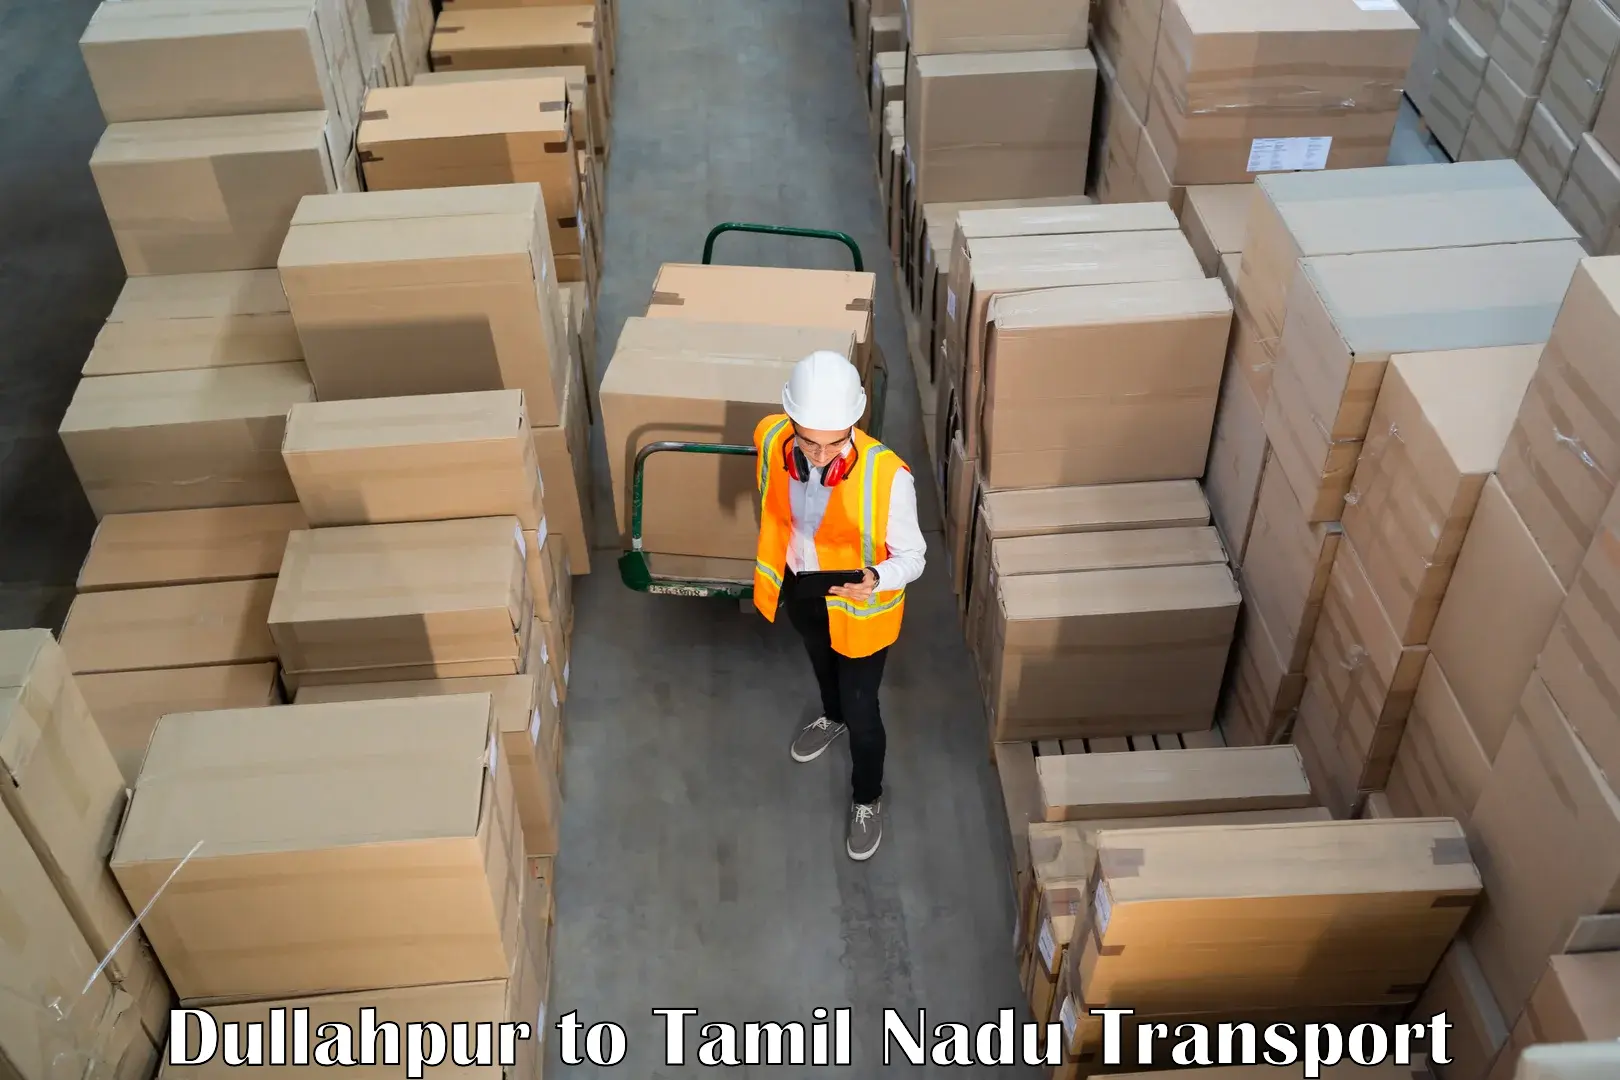 Domestic goods transportation services Dullahpur to Vellore Institute of Technology